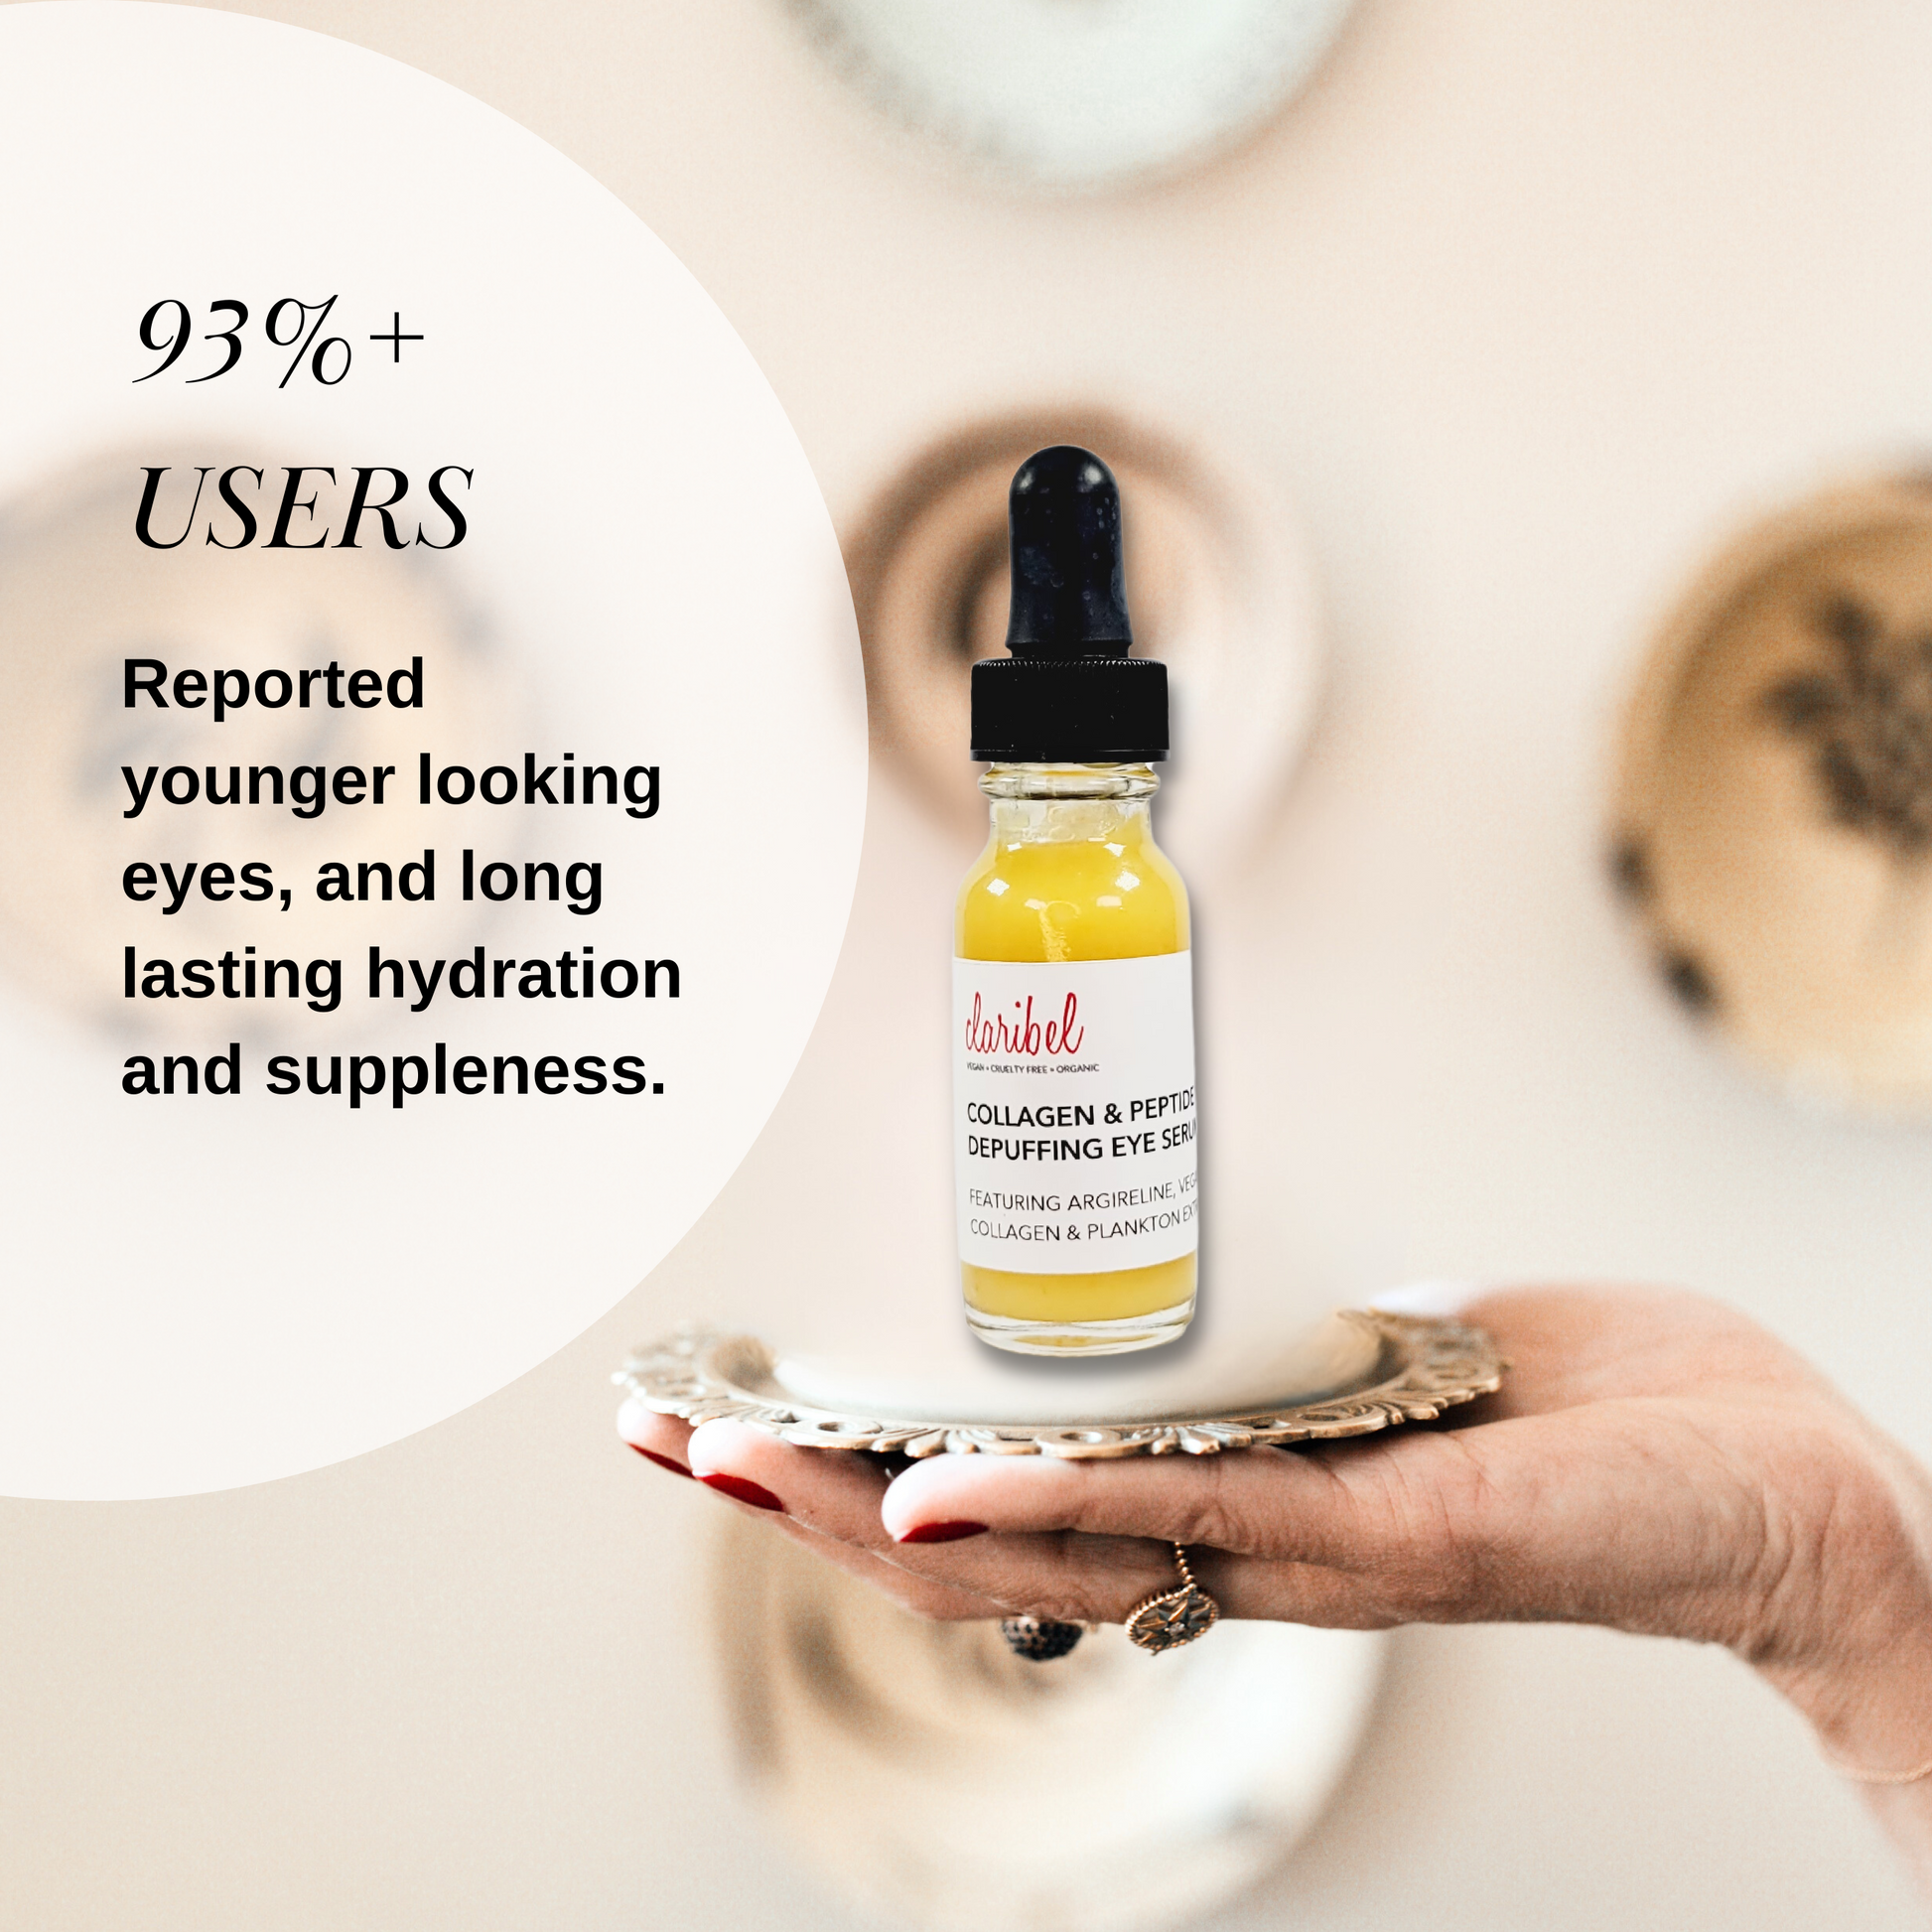 Depuffing Eye Serum with Collagen and Peptides 